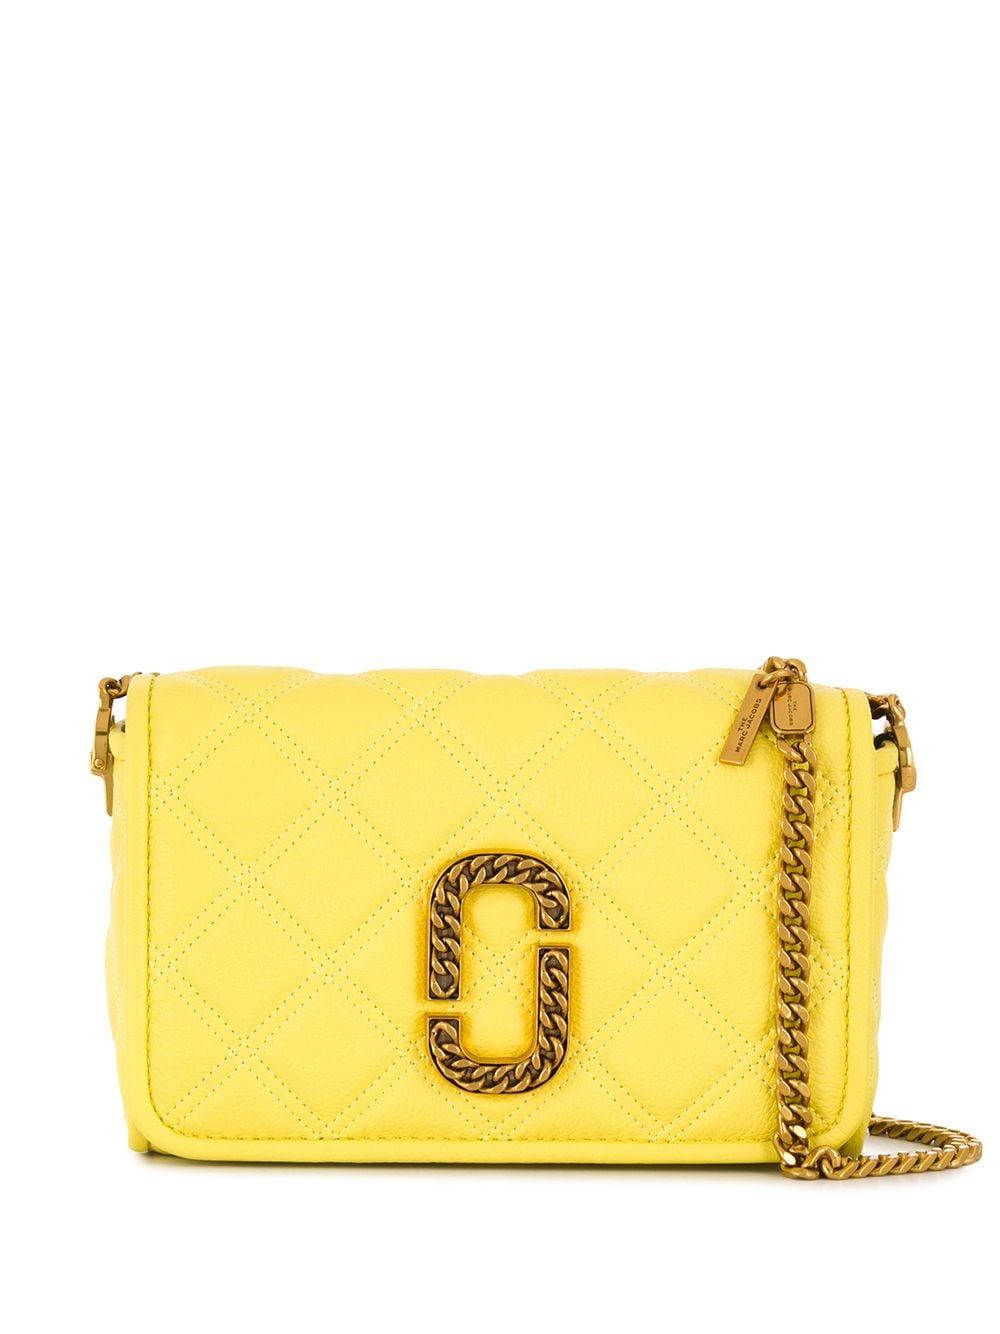 Marc Jacobs Leather The Status Flap Crossbody Bag in Yellow - Save 43% ...